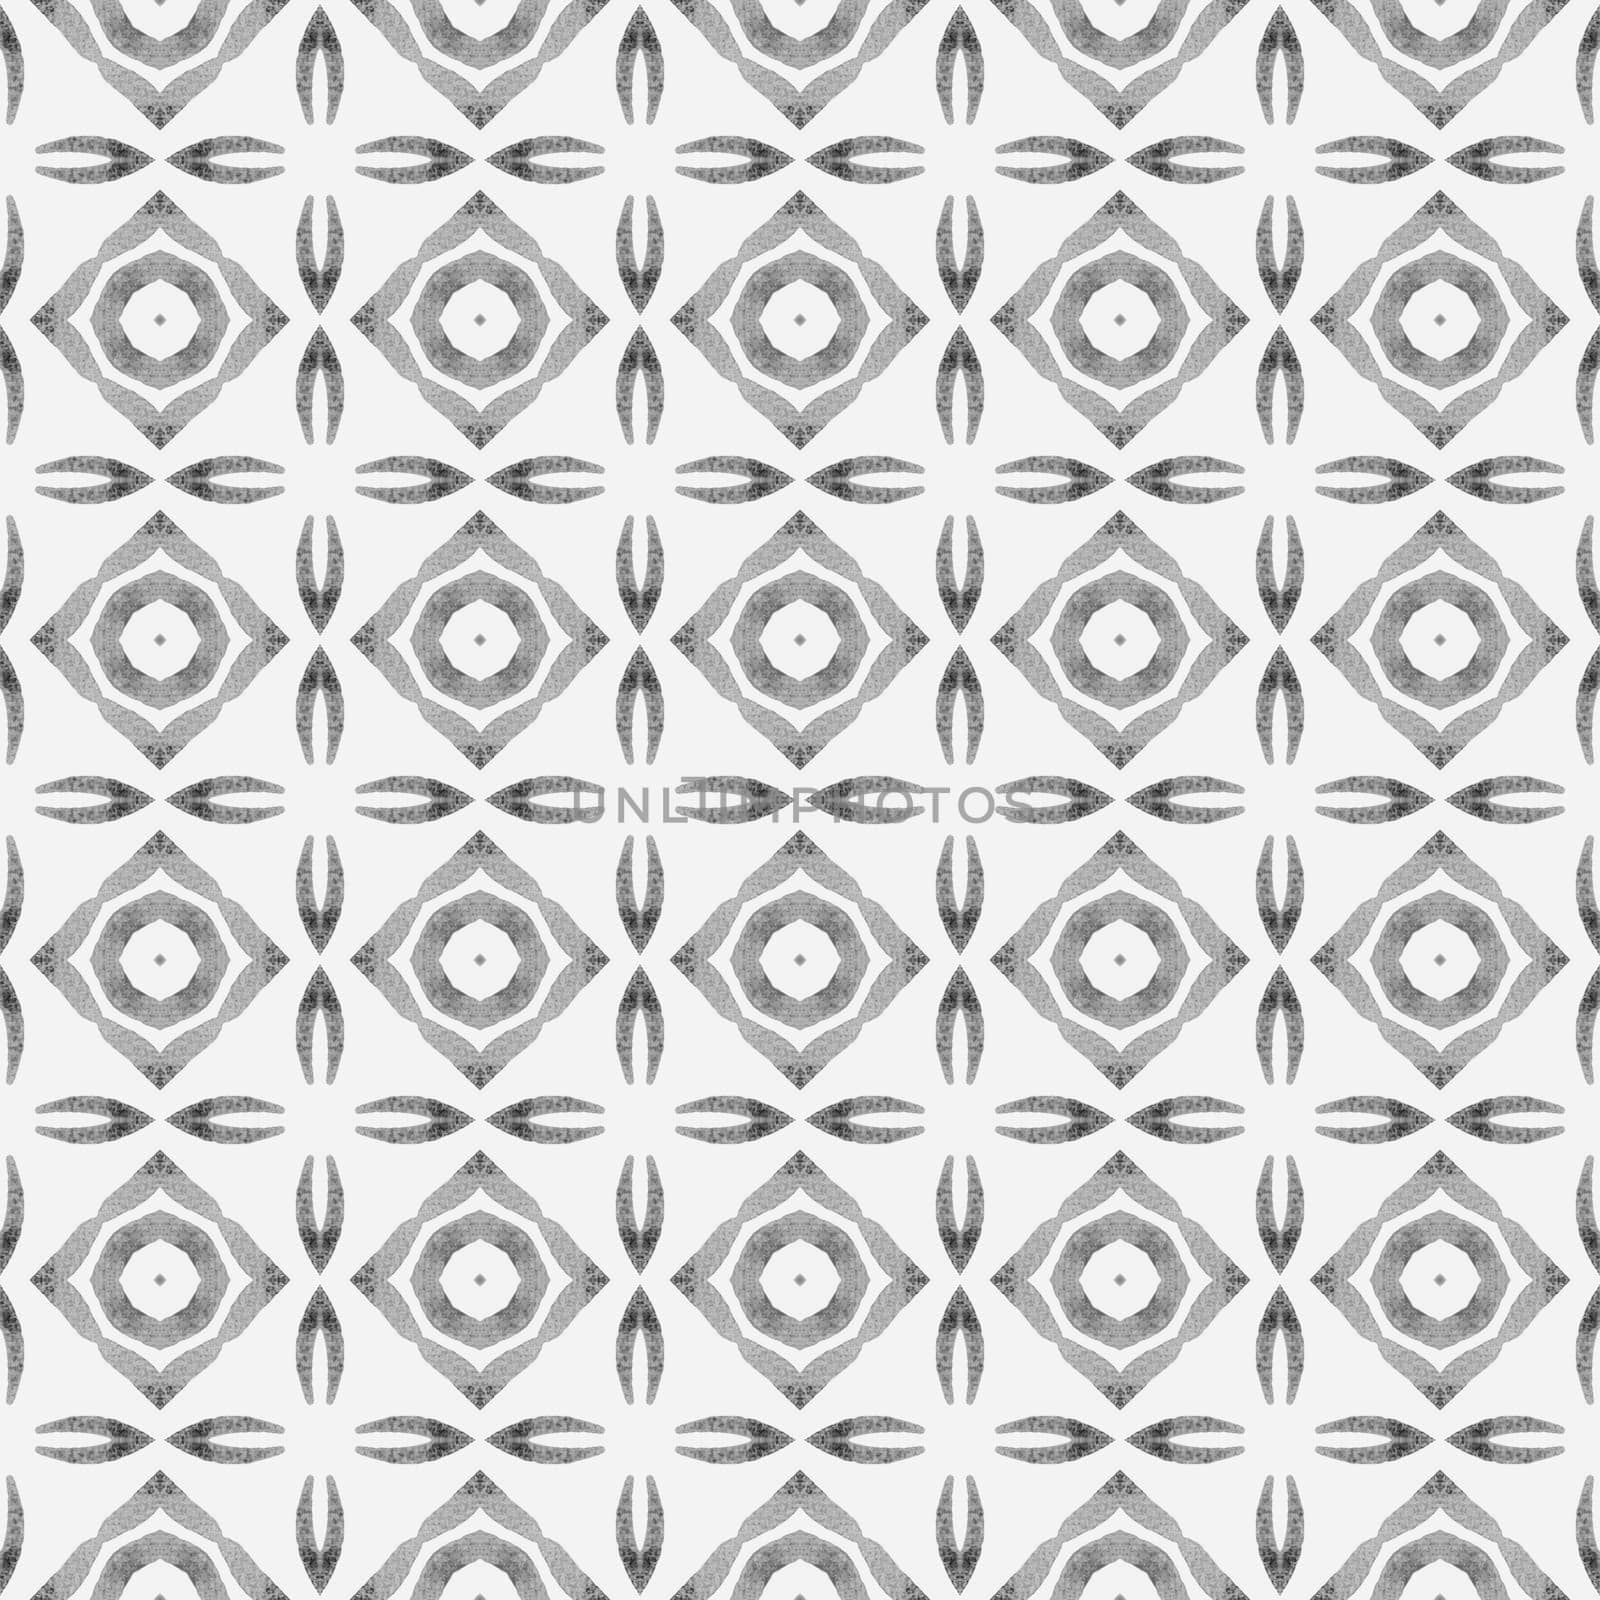 Textile ready exceptional print, swimwear fabric, wallpaper, wrapping. Black and white captivating boho chic summer design. Trendy organic green border. Organic tile.